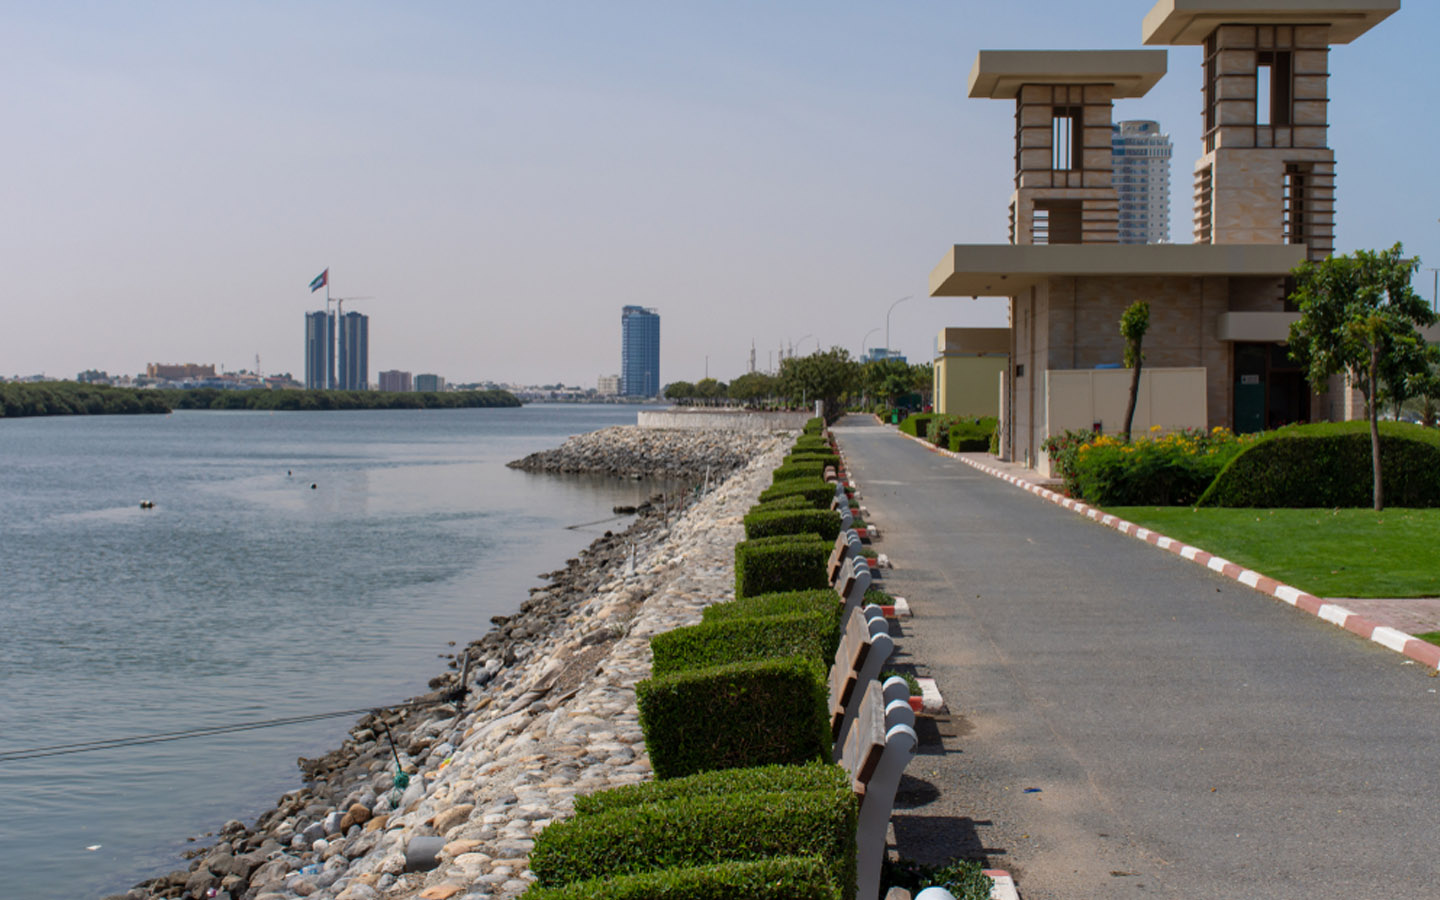 Enjoy the serenity of Al Qawasim Corniche in Ras Al Khaimah, a picturesque waterfront promenade overlooking the Arabian Gulf and mangroves. Take a leisurely stroll along the palm-lined walkway, relax on one of the many benches, or let your kids play on the playground.